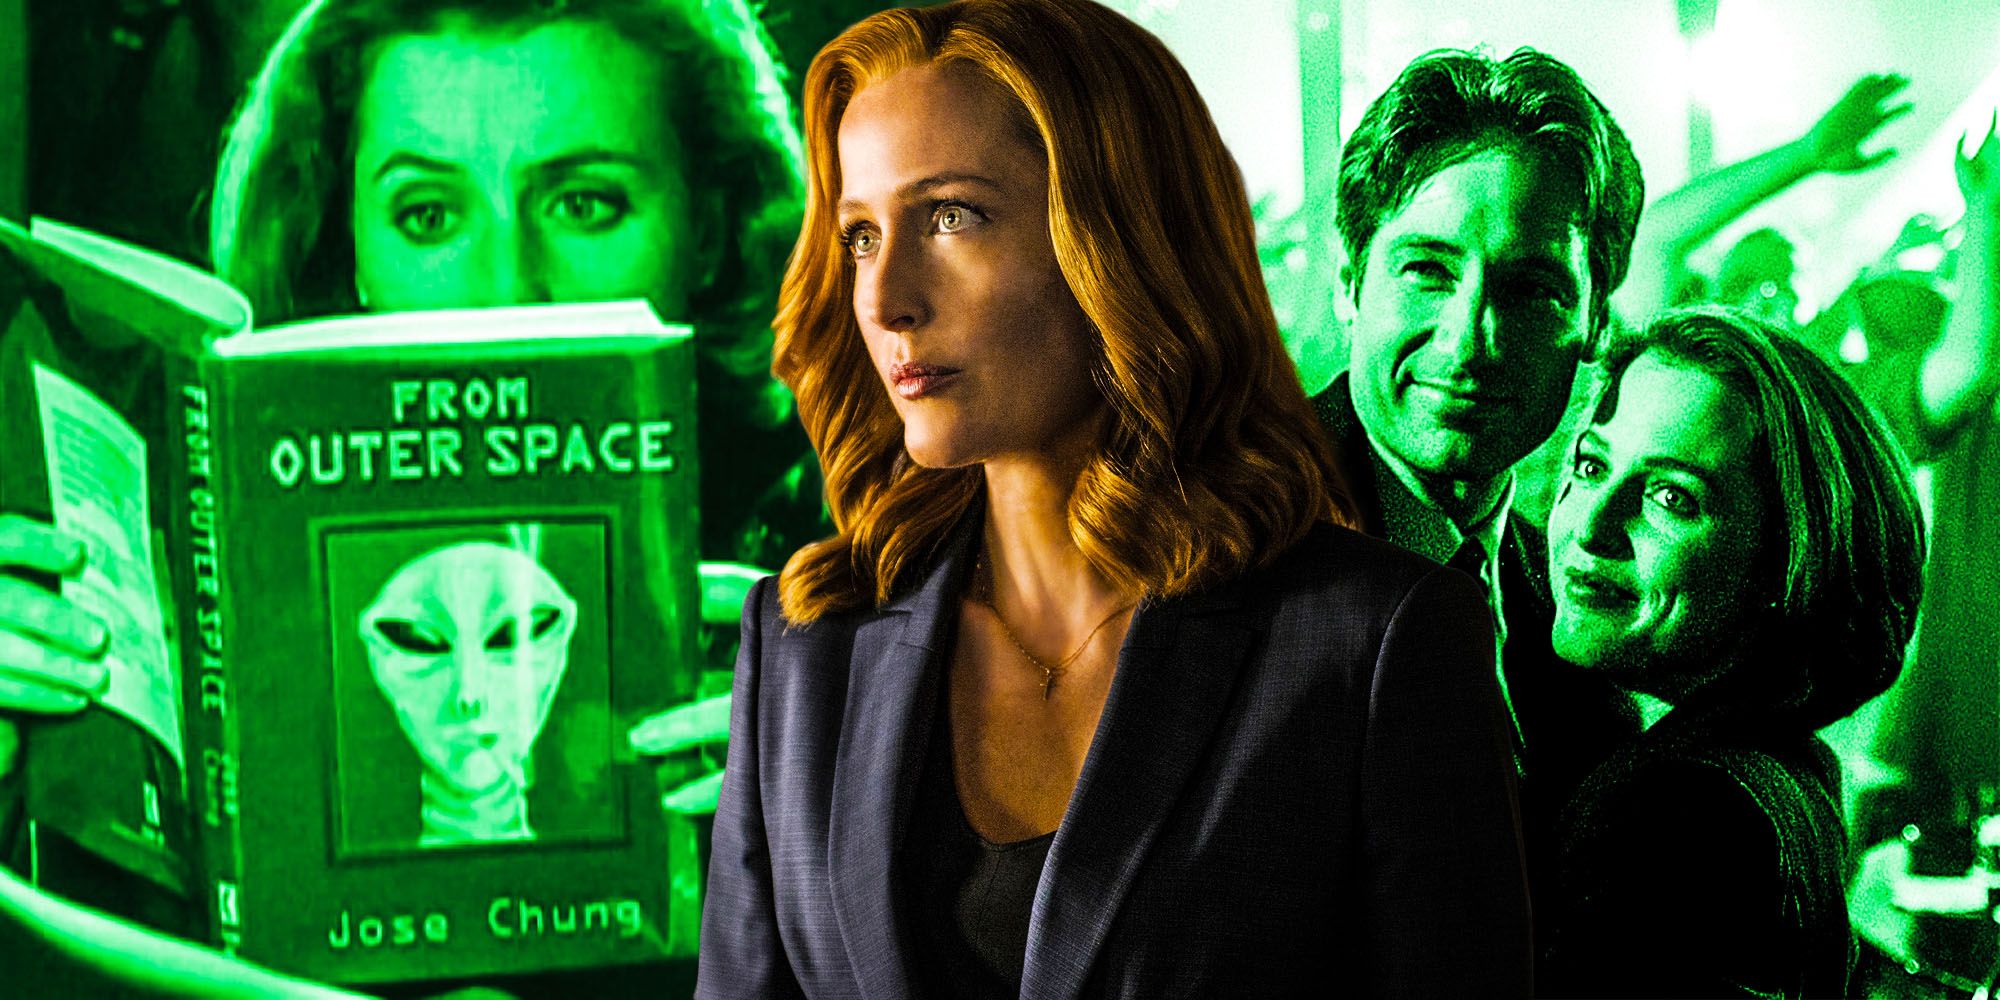 Gillian Anderson favorite X files episodes Jose chungs from outer space post modern prometheus